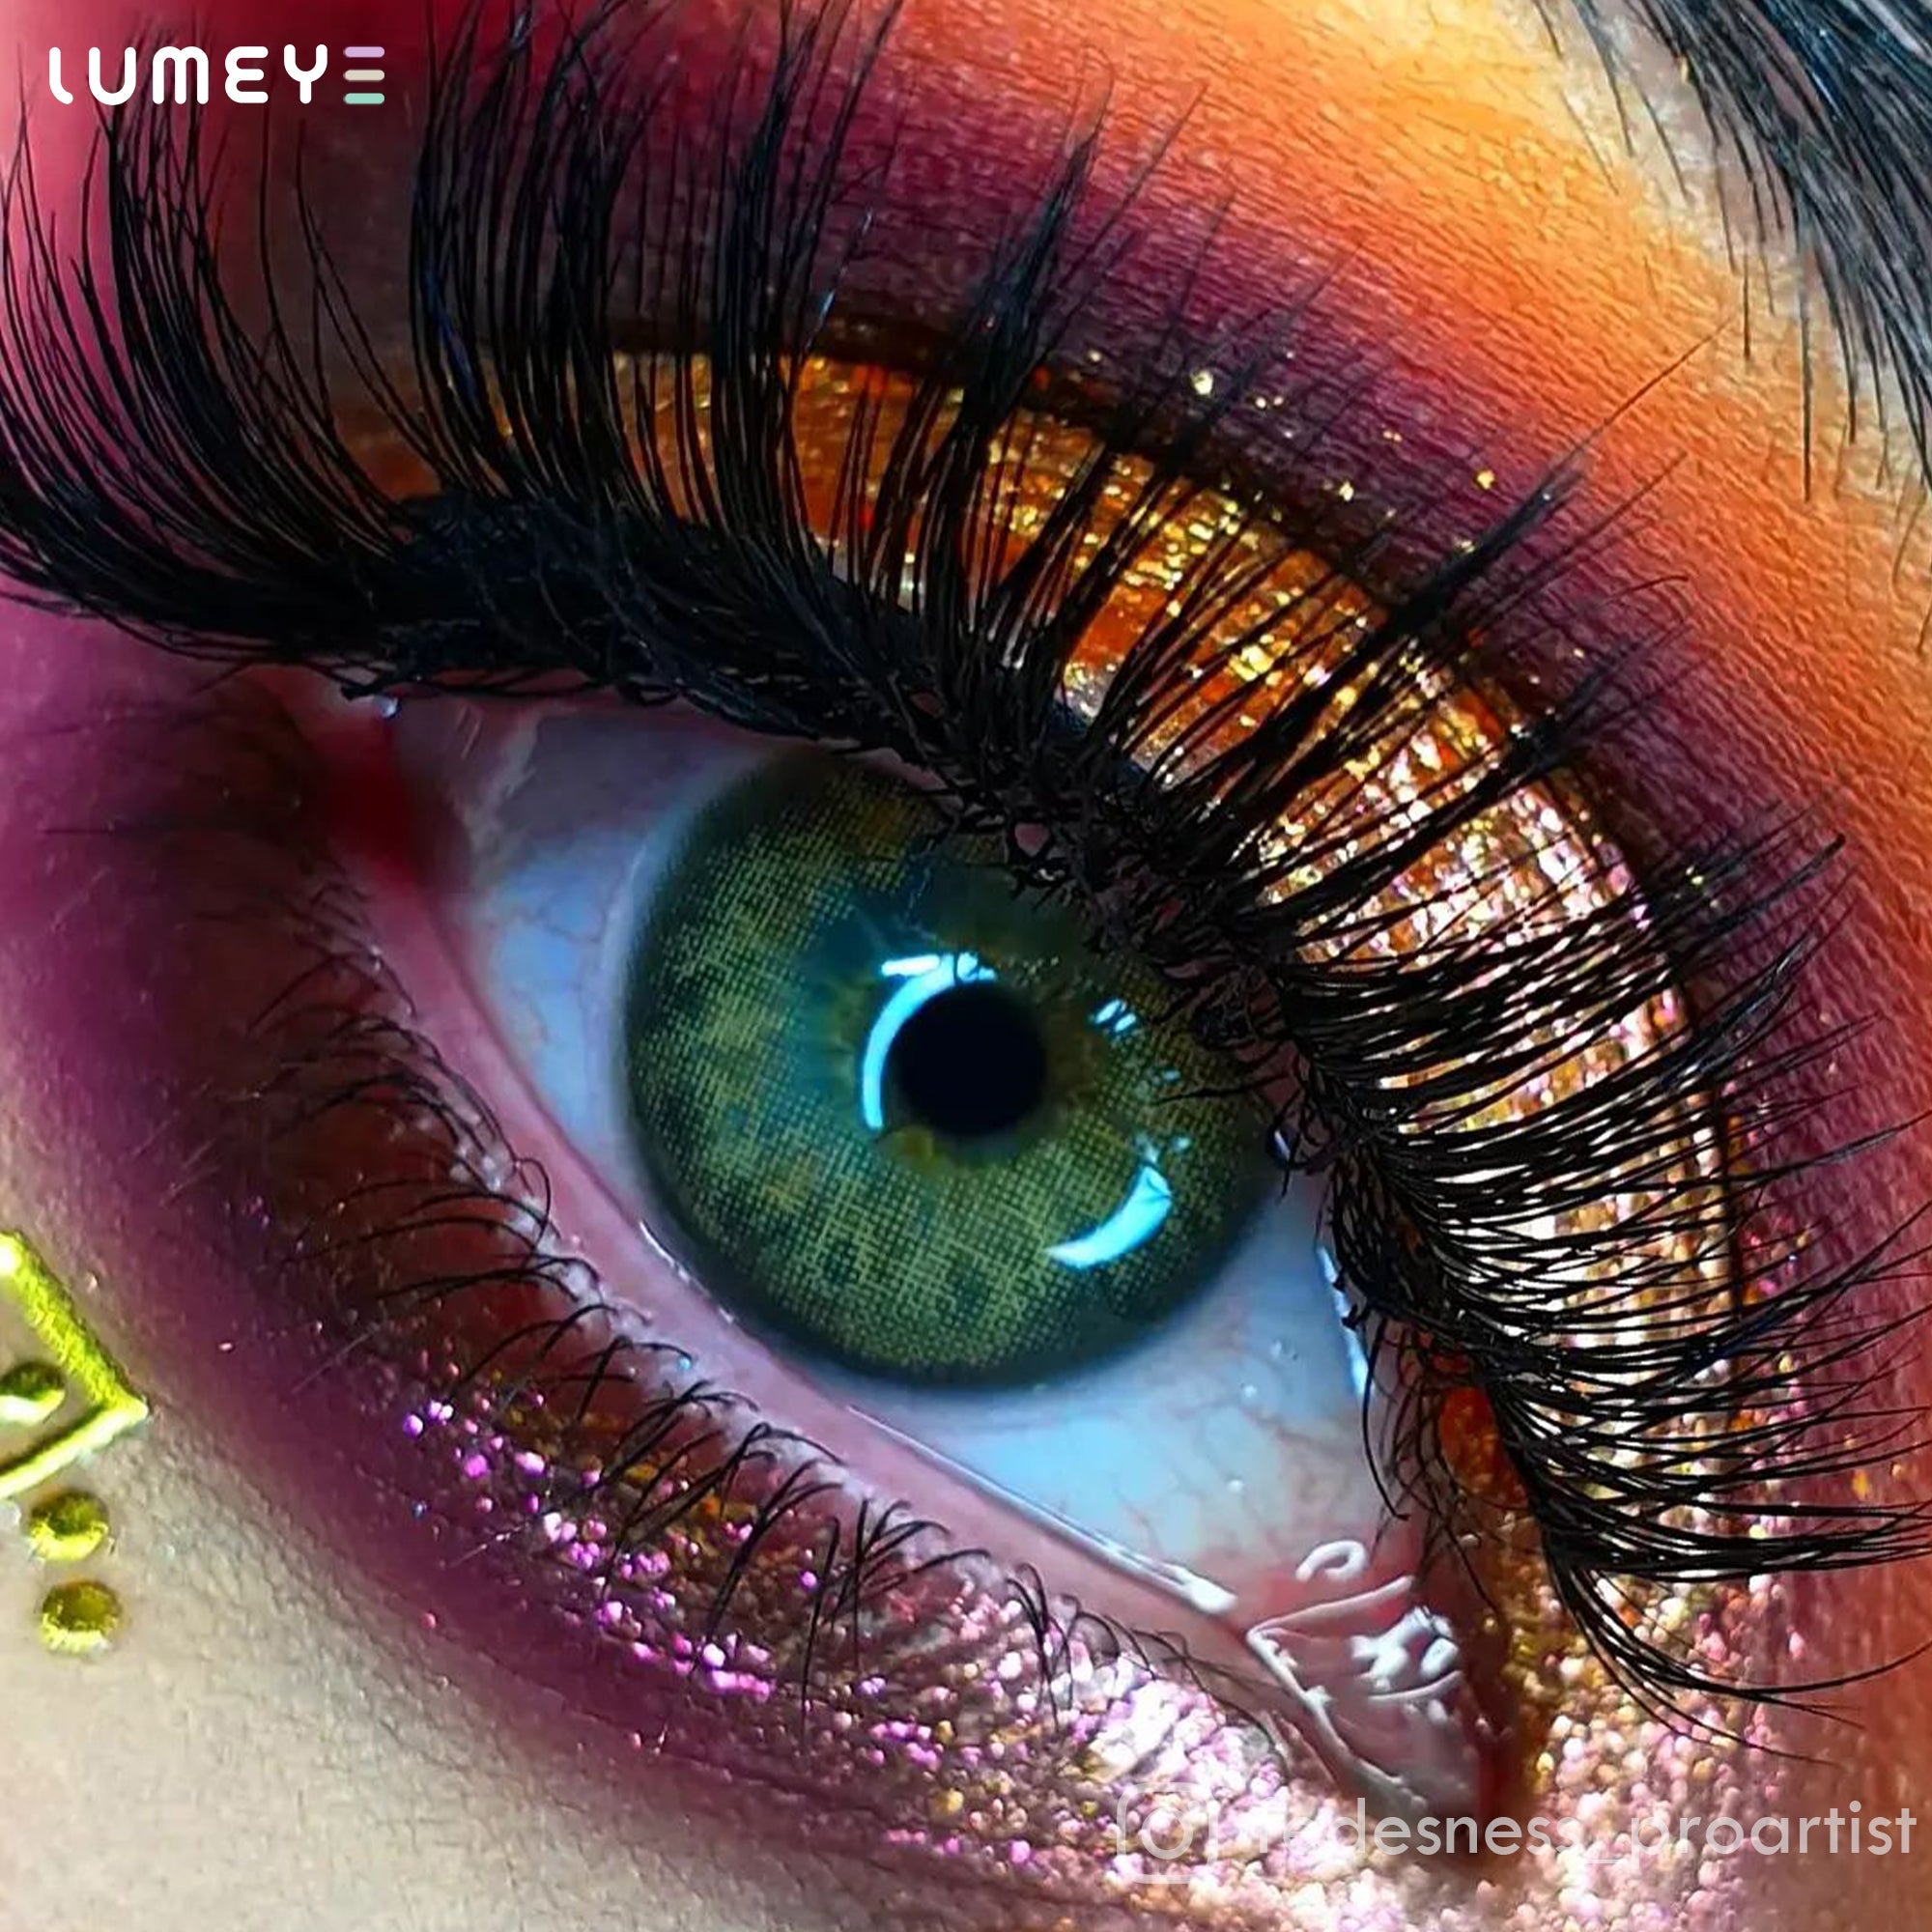 Best COLORED CONTACTS - LUMEYE Rock The Party Handmade Eyelashes - LUMEYE